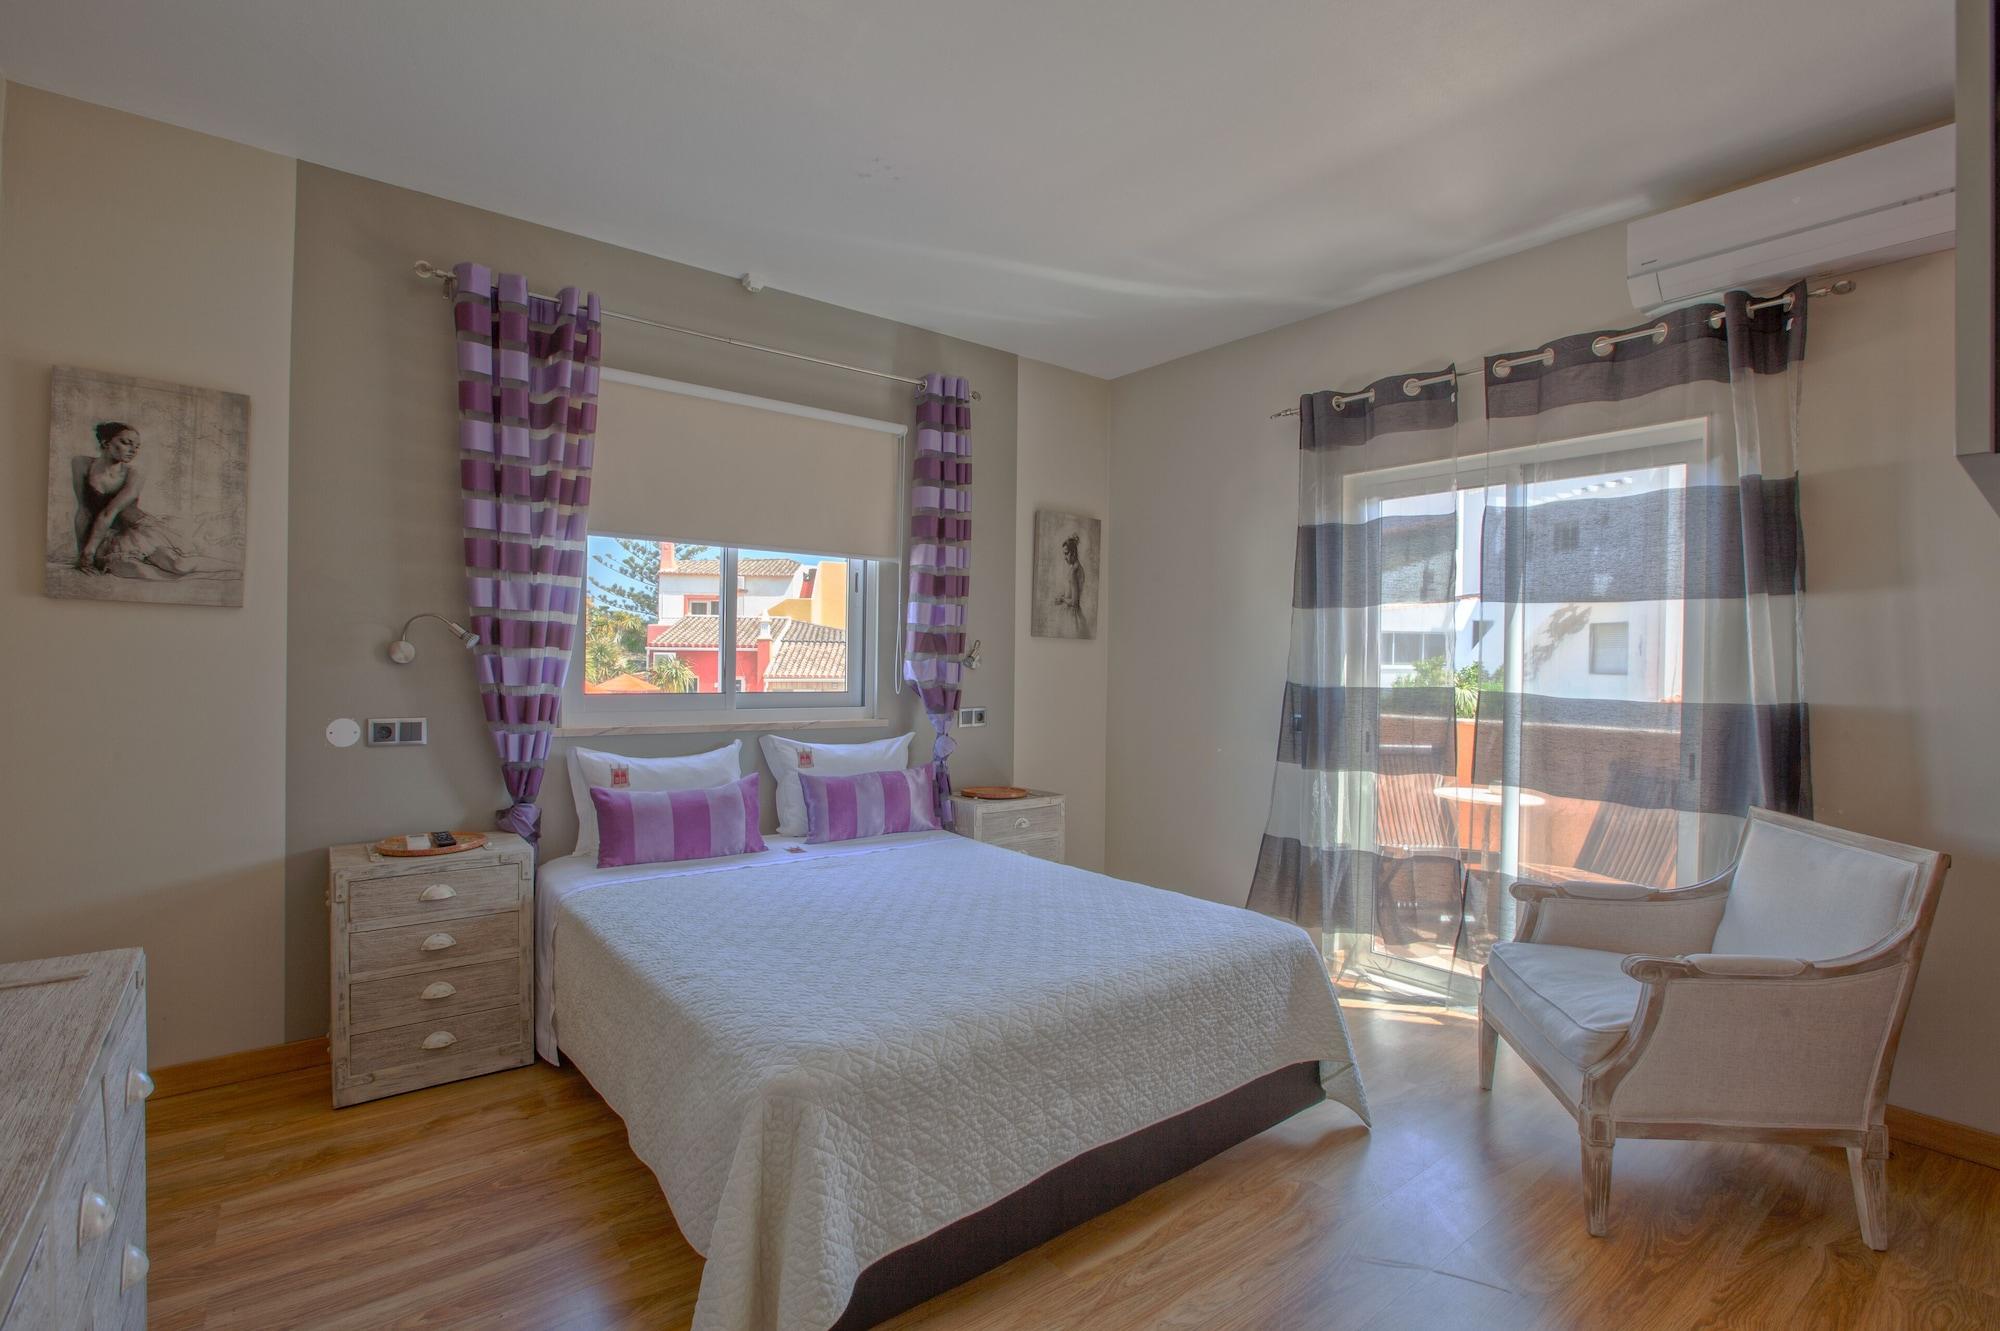 Villas D. Dinis - Charming Residence (Adults Only) Lagos Esterno foto